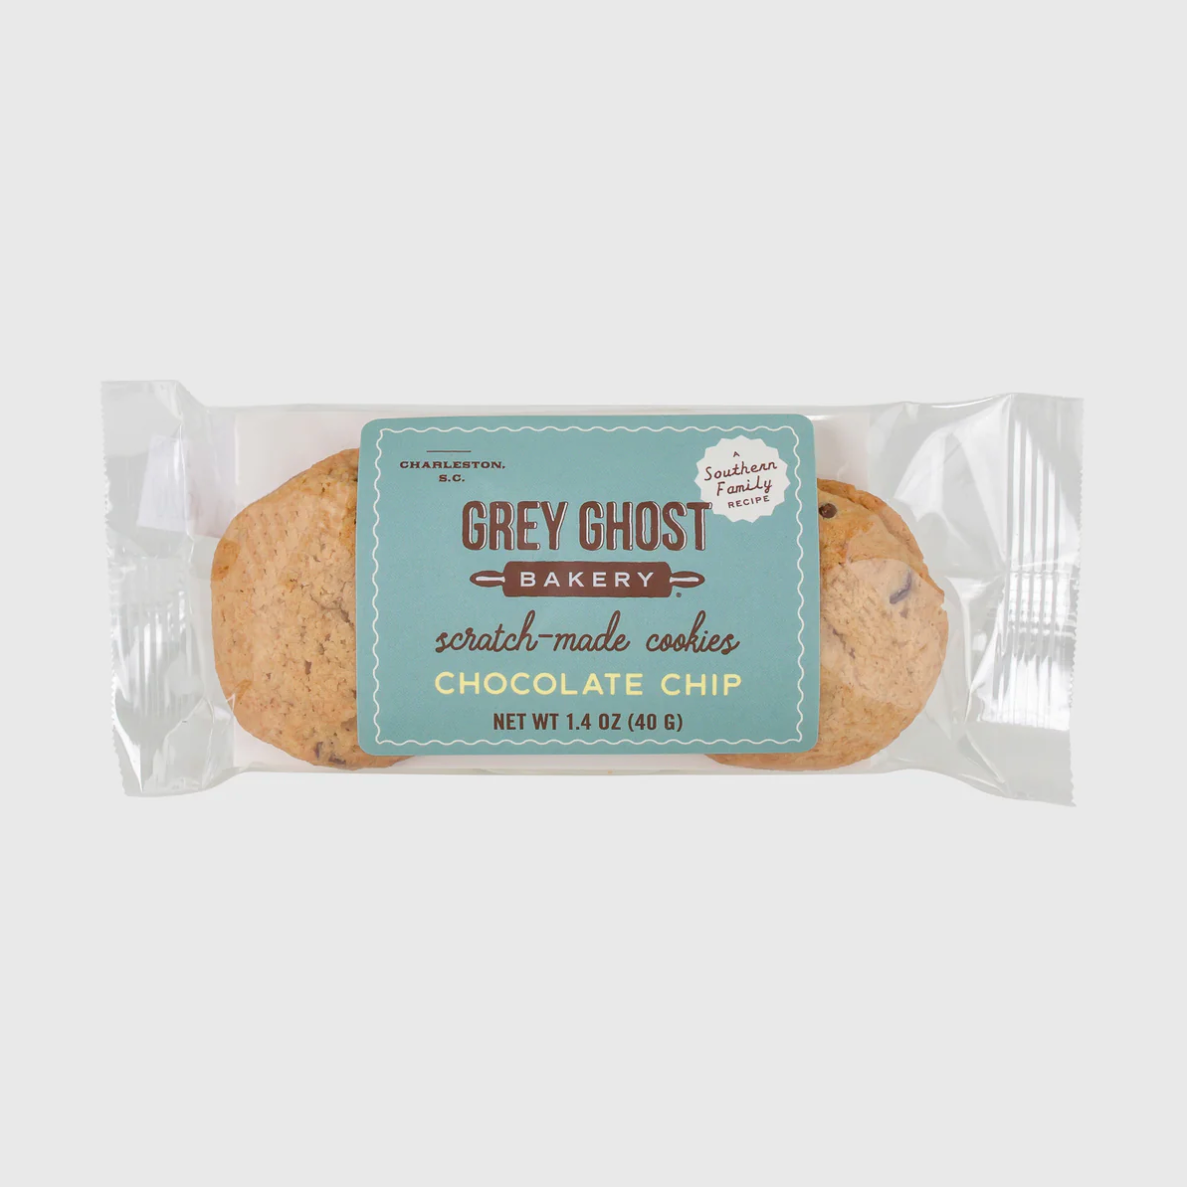 Grey Ghost Bakery scratch-made cookies: Chocolate Chip 2-pack cookies.